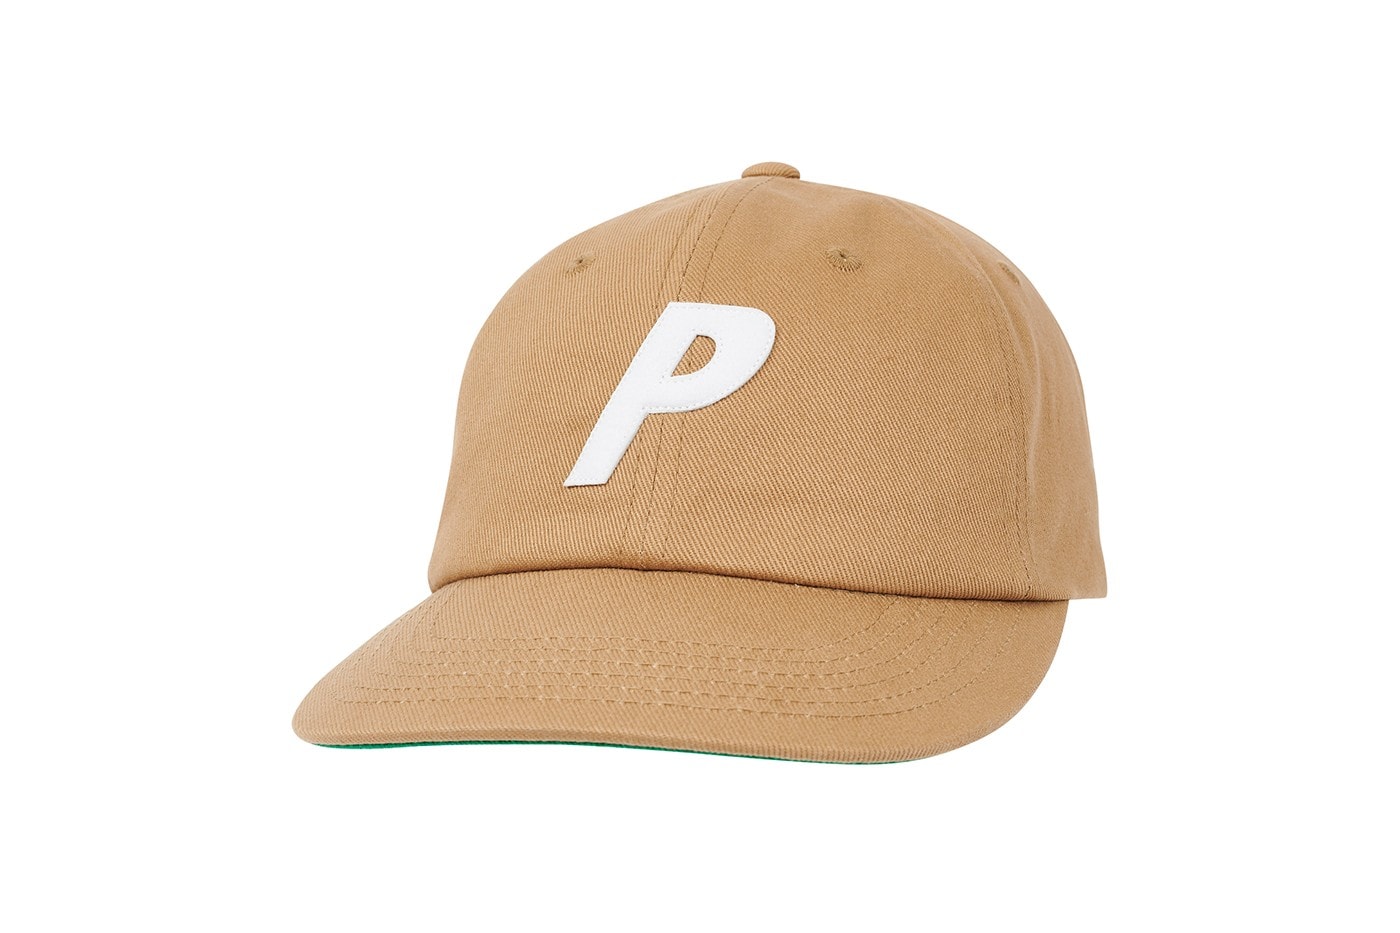 Palace Fall 2020 Collection Drop 4 Release Info Full Range pieces Hoodie Cap Accessories T-Shirt Logo 